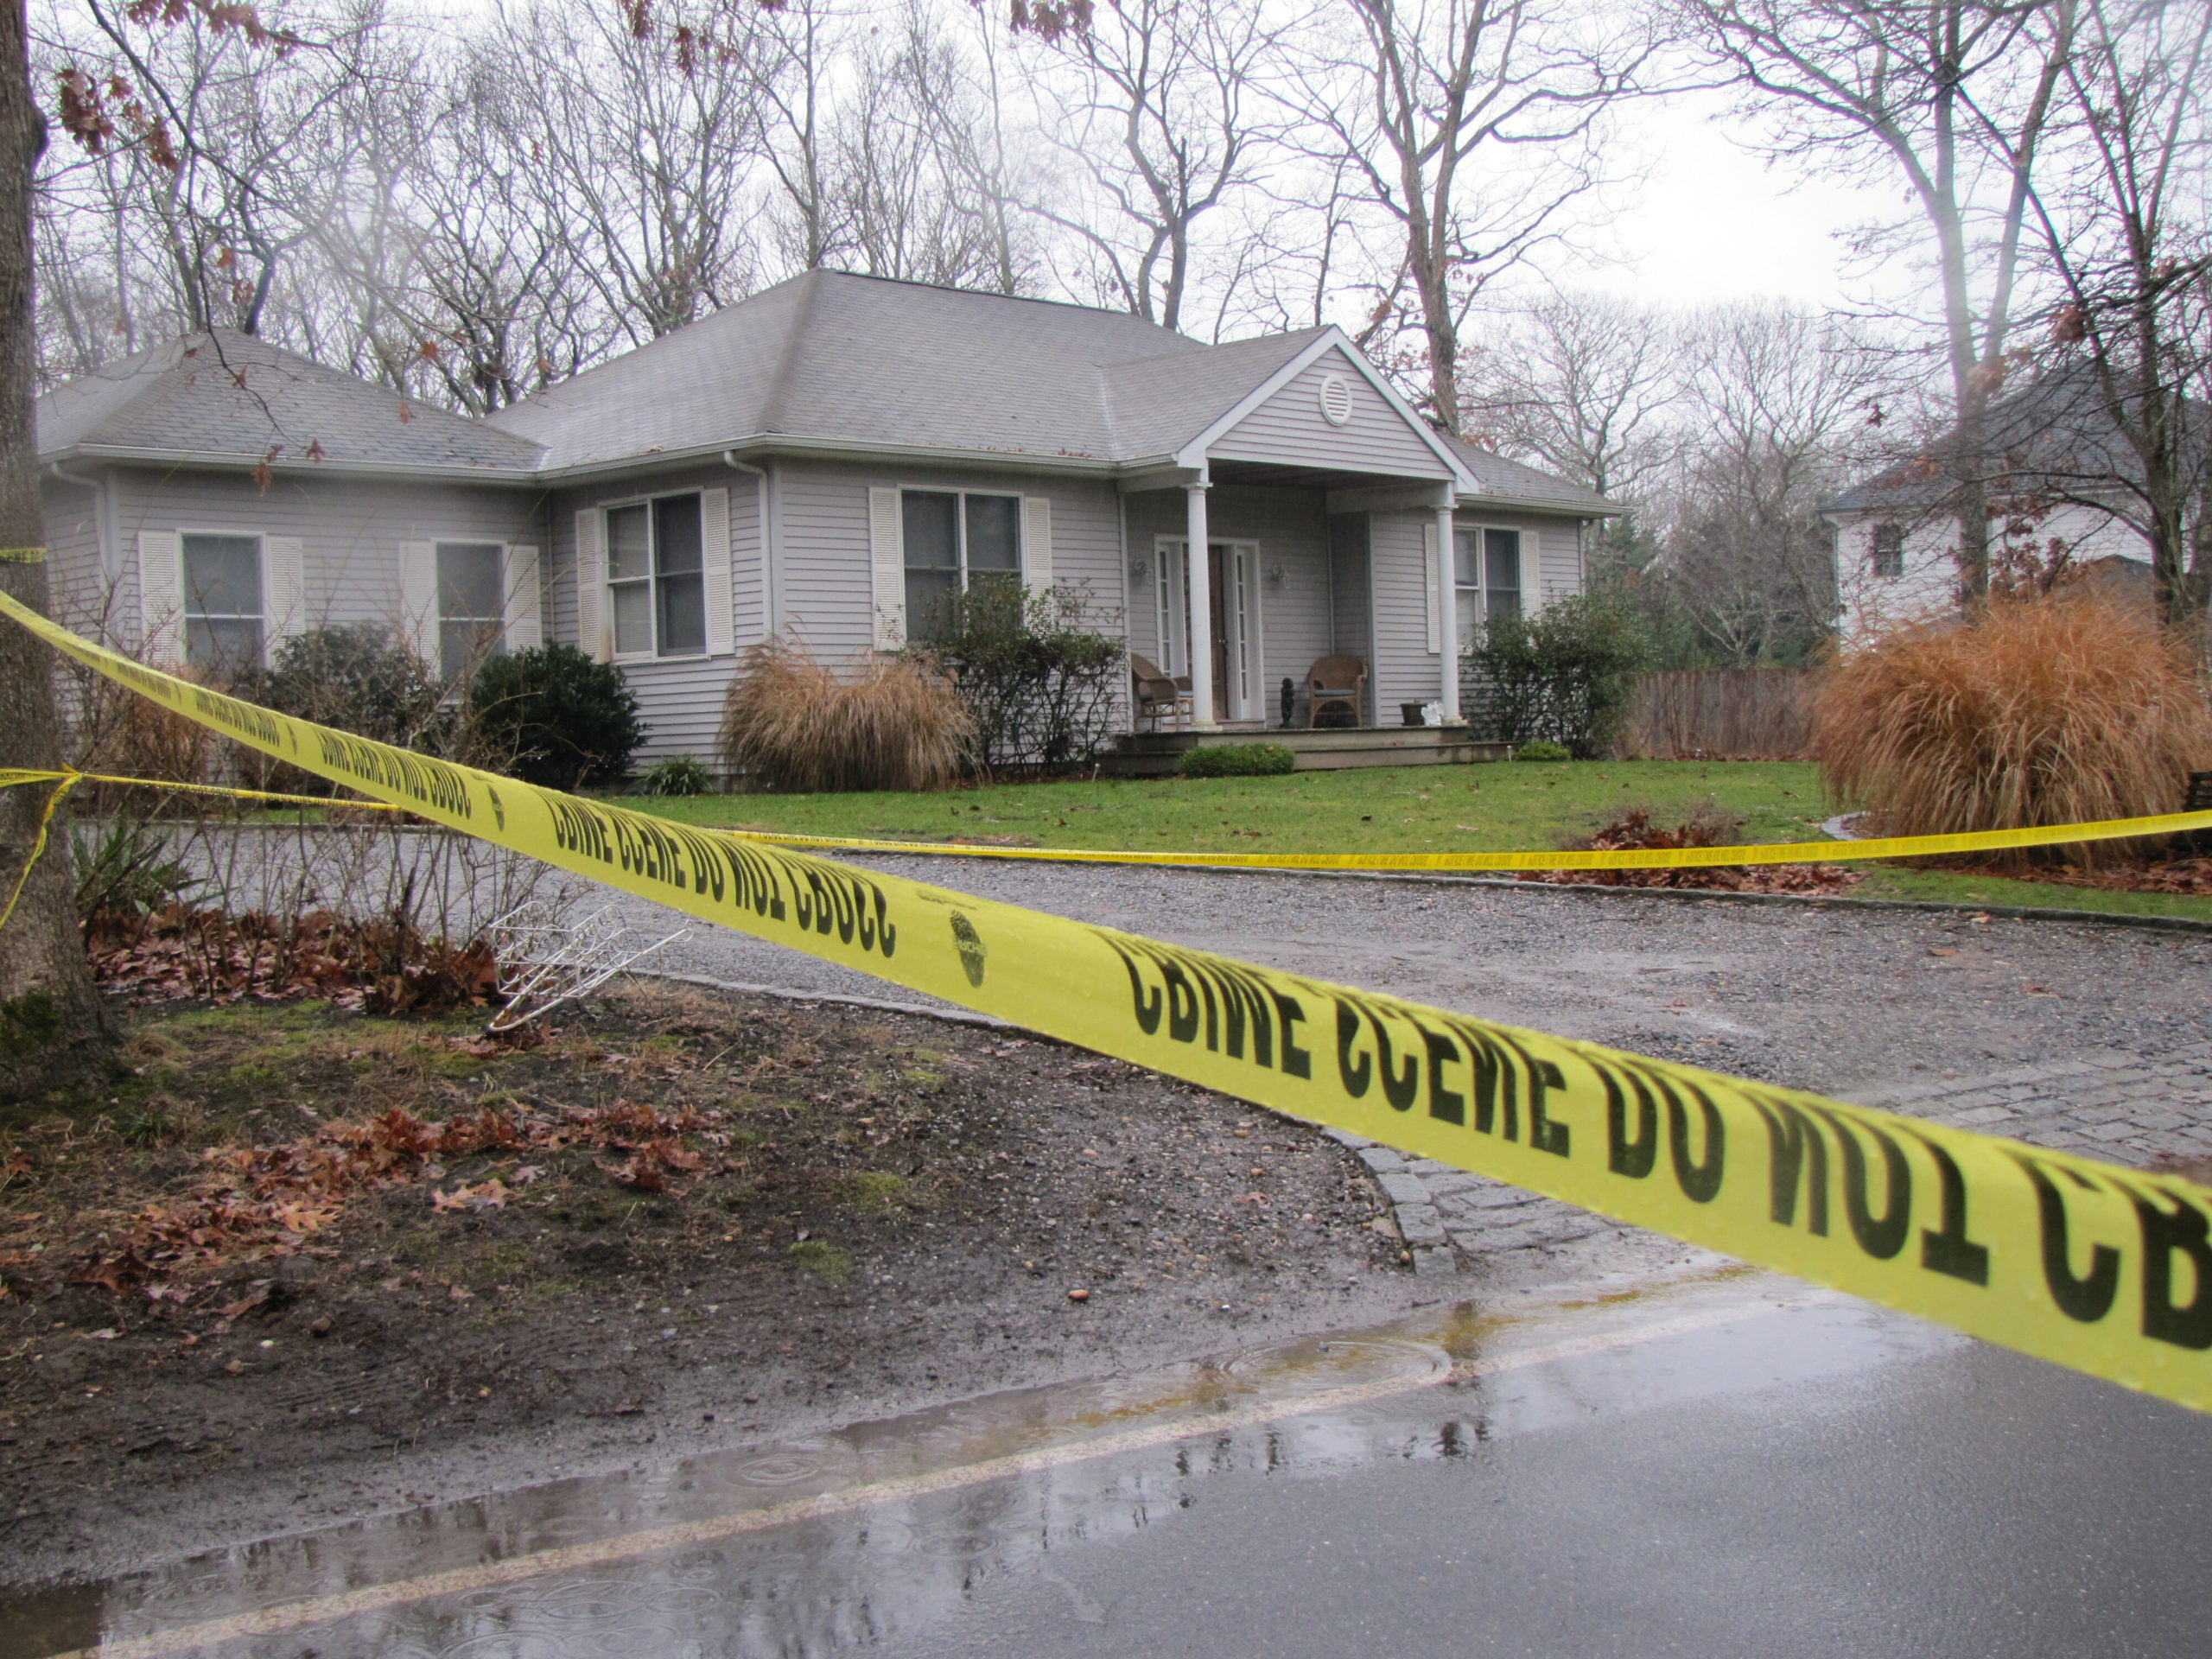 The home at 90 Roses Grove Road where at least one person was shot and killed on Christmas morning.